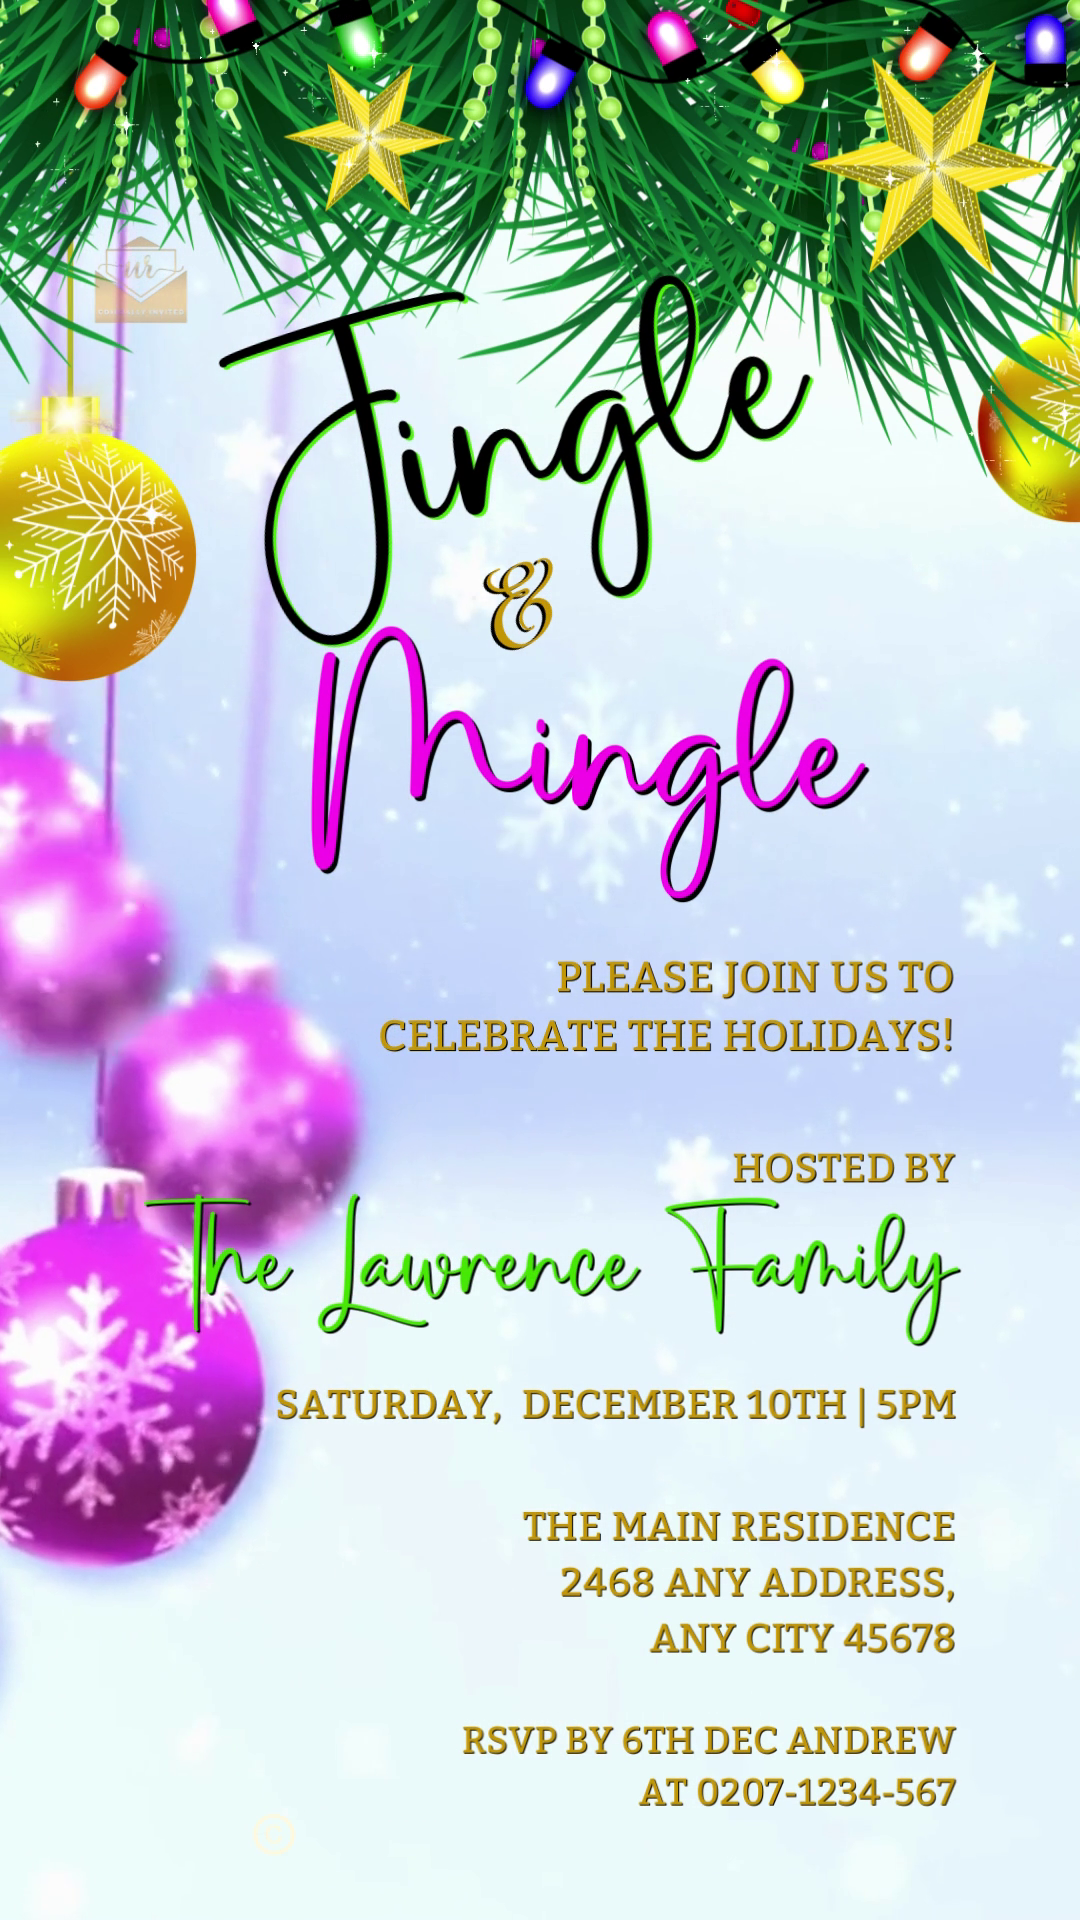 Jingle & Mingle Pink Gold Christmas Party Video Invite featuring purple and yellow ornaments, editable via Canva for easy personalization and digital sharing.